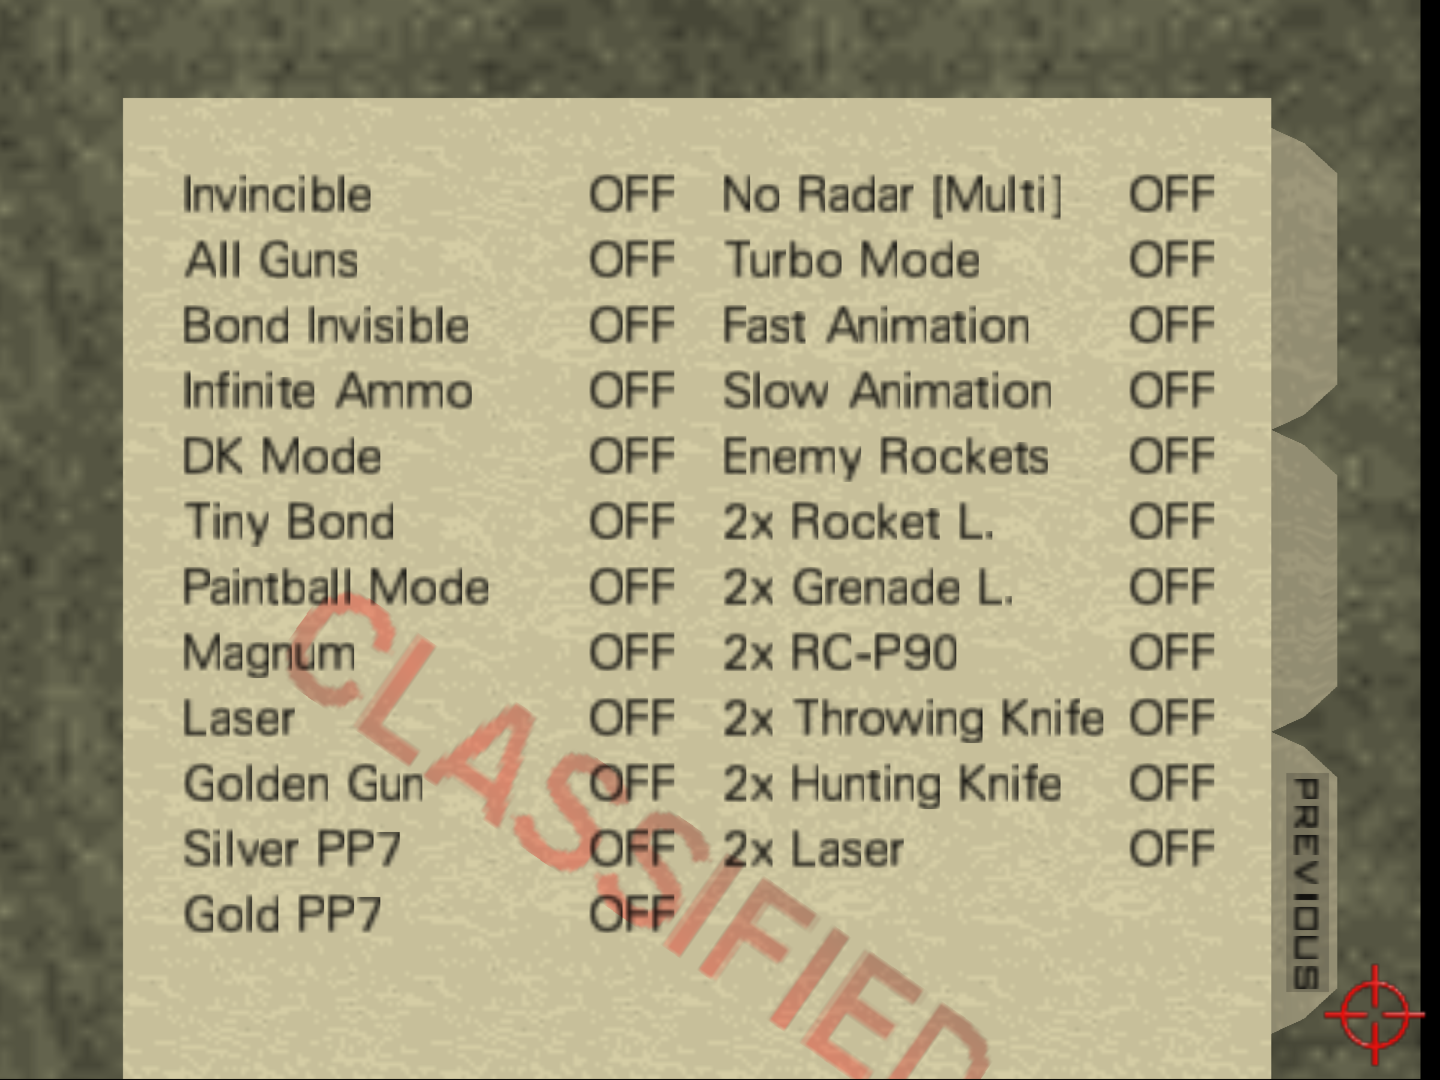 GoldenEye Gameshark Codes - How To Enter Codes With PC Tutorial